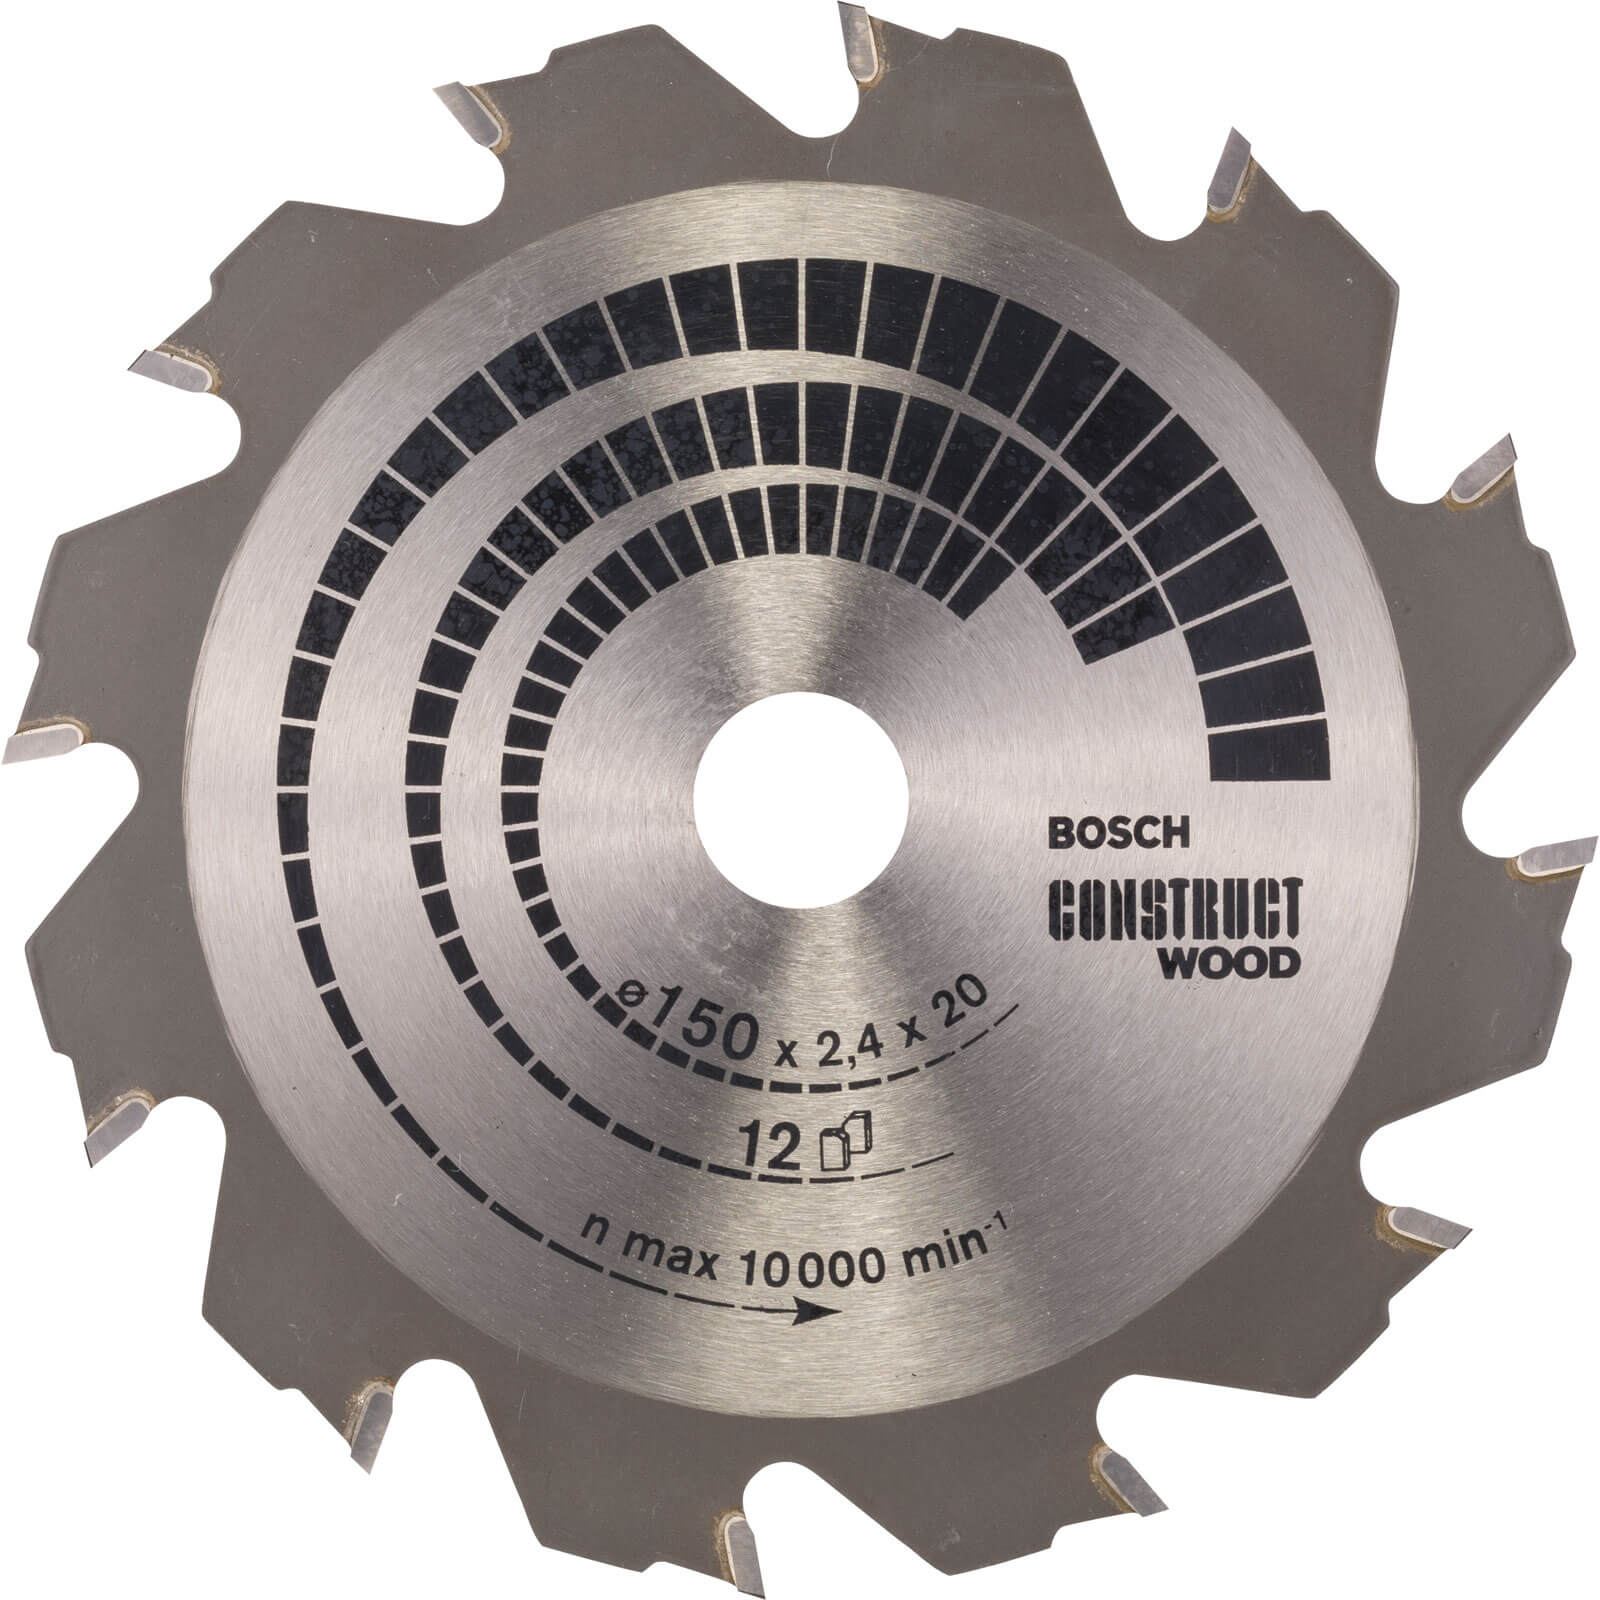 Photo of Bosch Construct Wood Cutting Saw Blade 150mm 12t 20mm